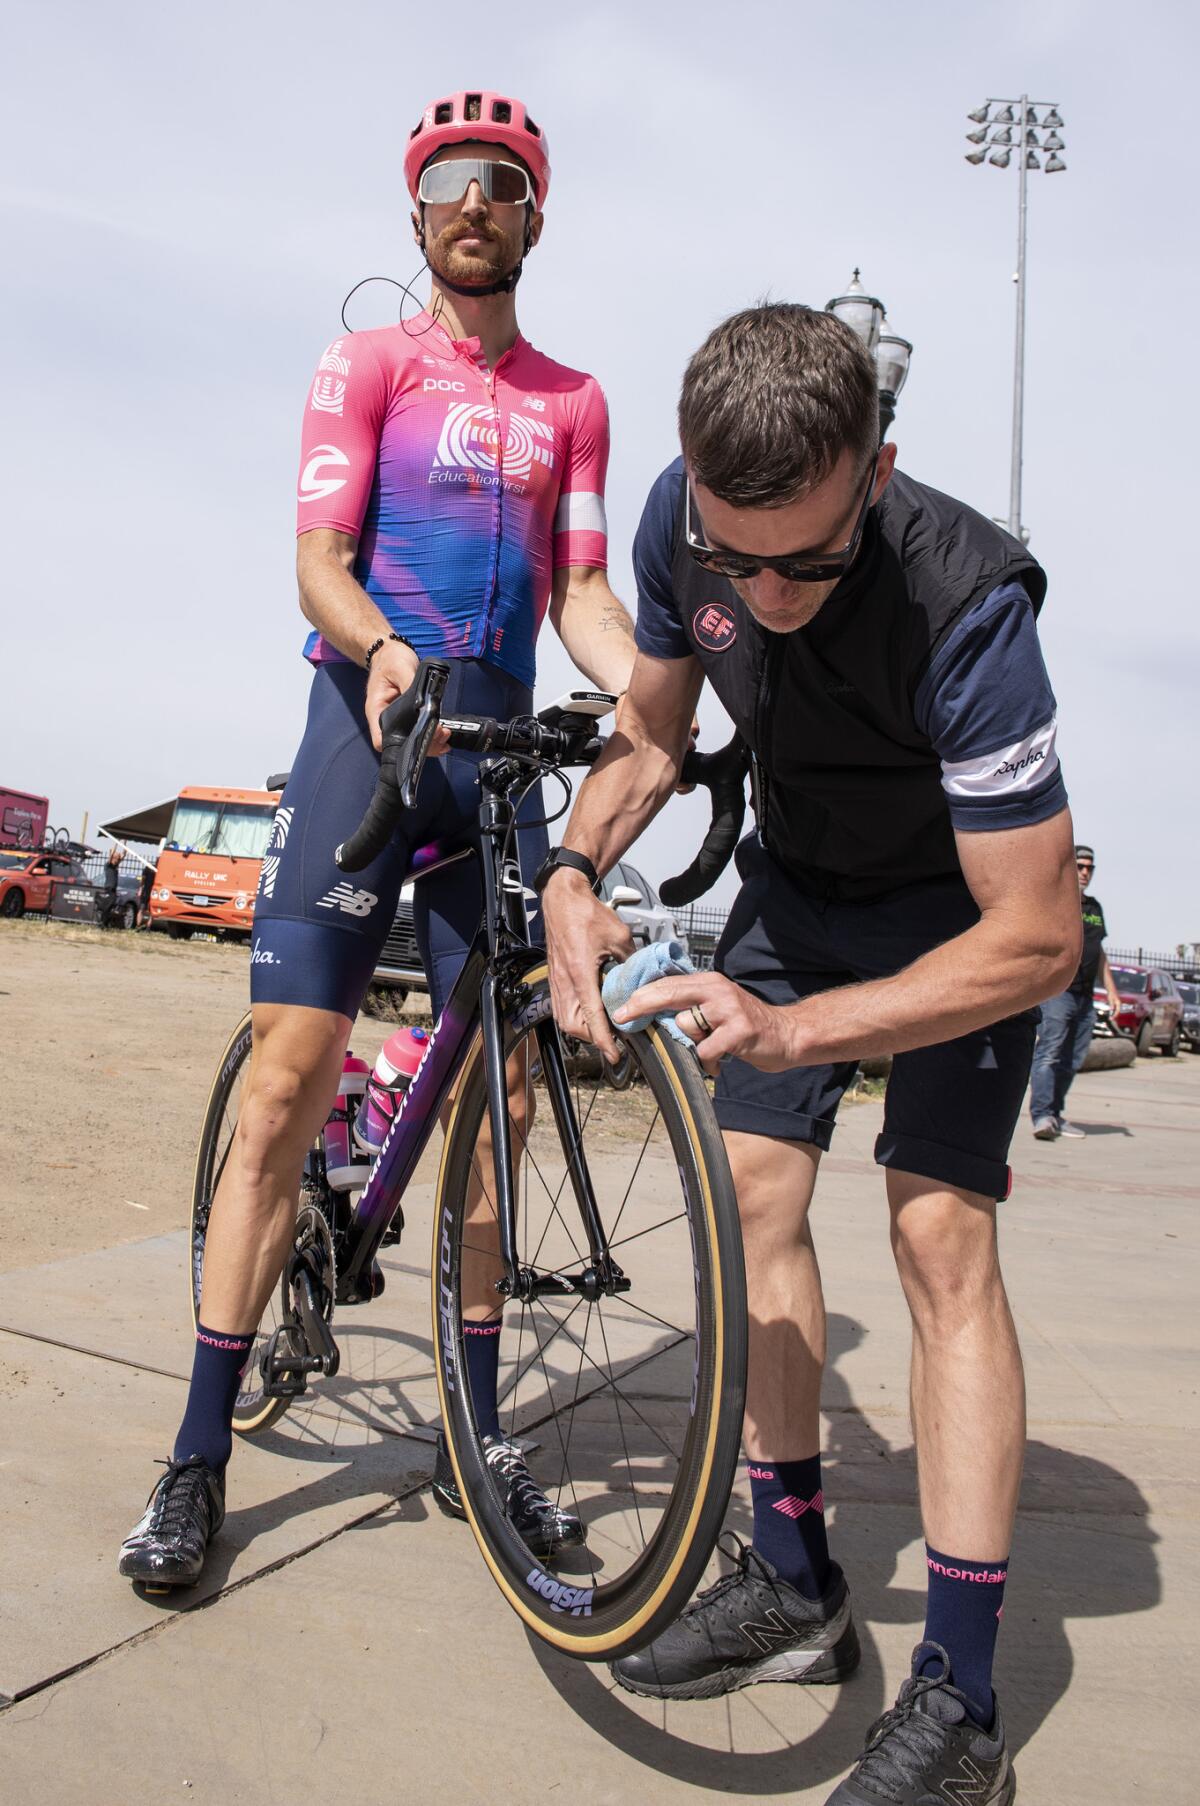 Team mechanic Tom Hopper cleans the tires of Taylor Phinney’s bike to help prevent any punctures after rolling it out of a lot with thistles growing in it.